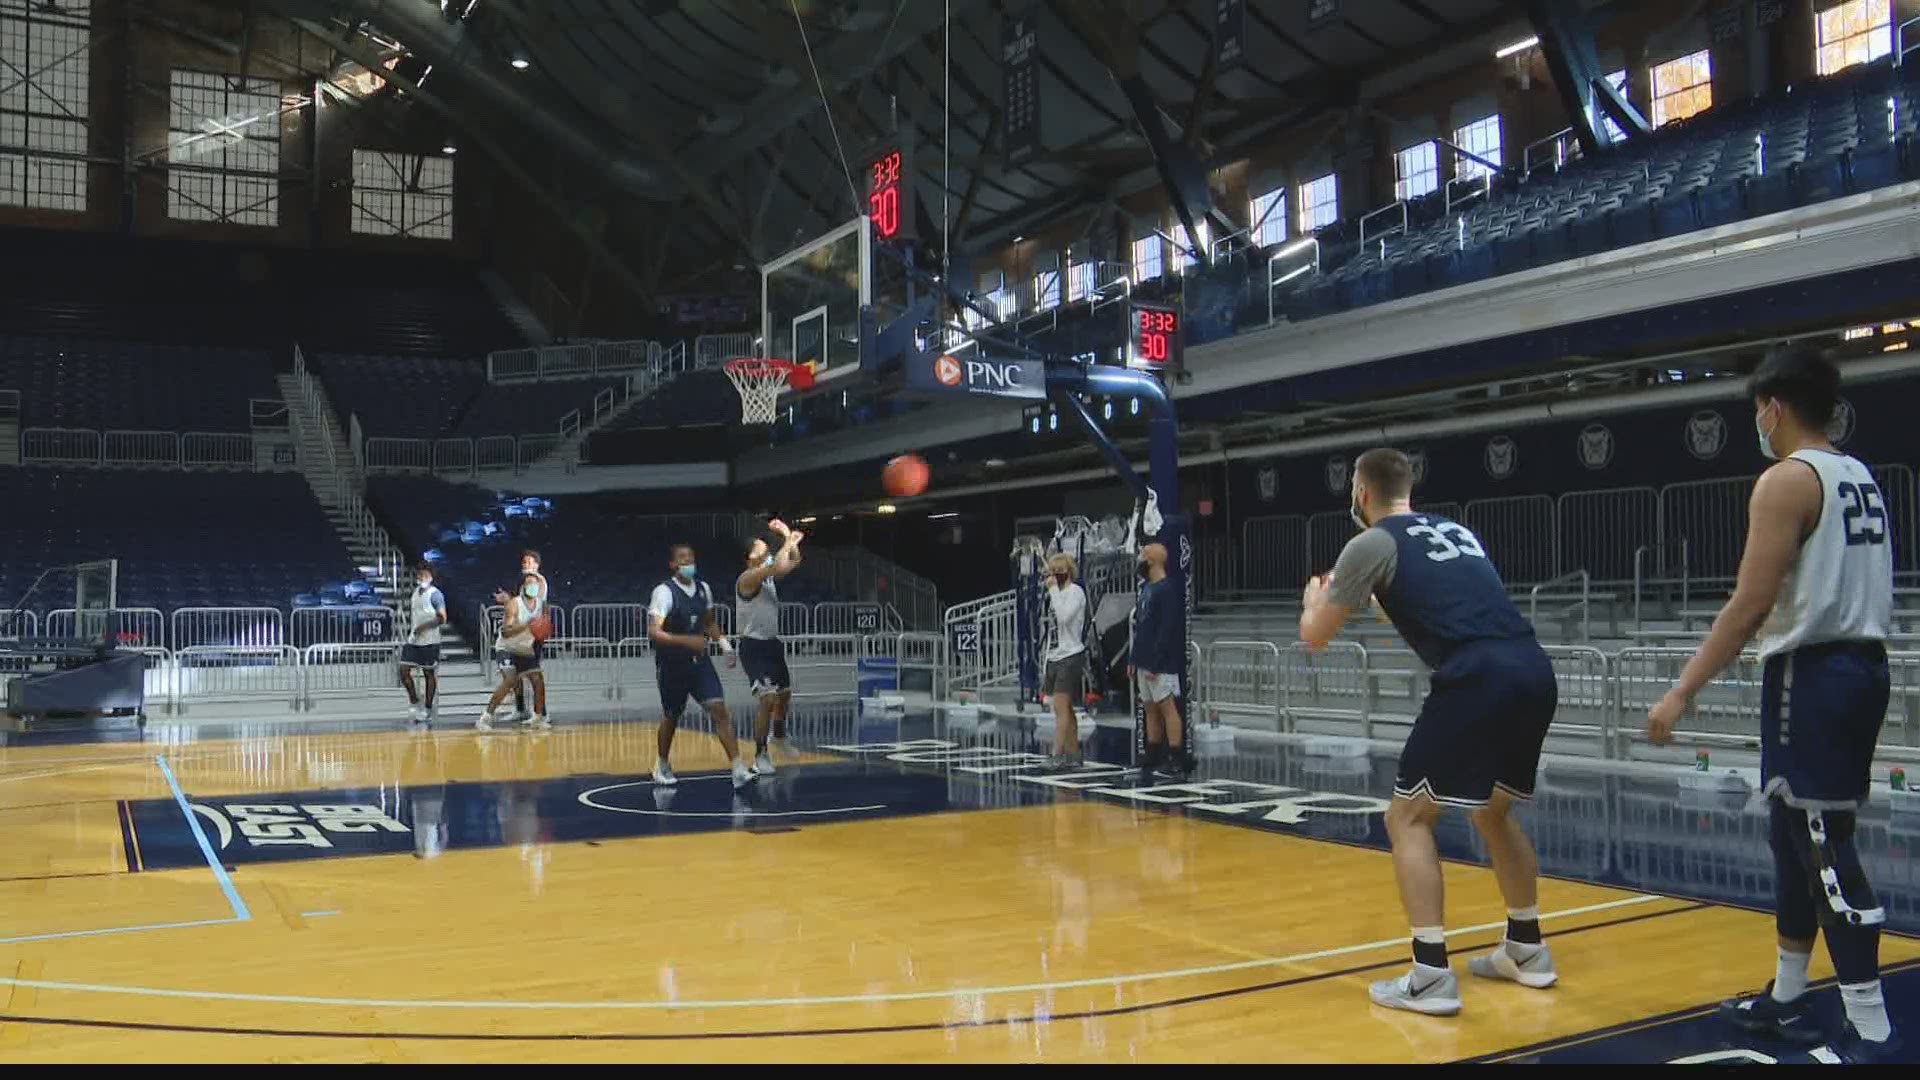 Crowds at Hinkle Fieldhouse will be limited to 25 percent of capacity.